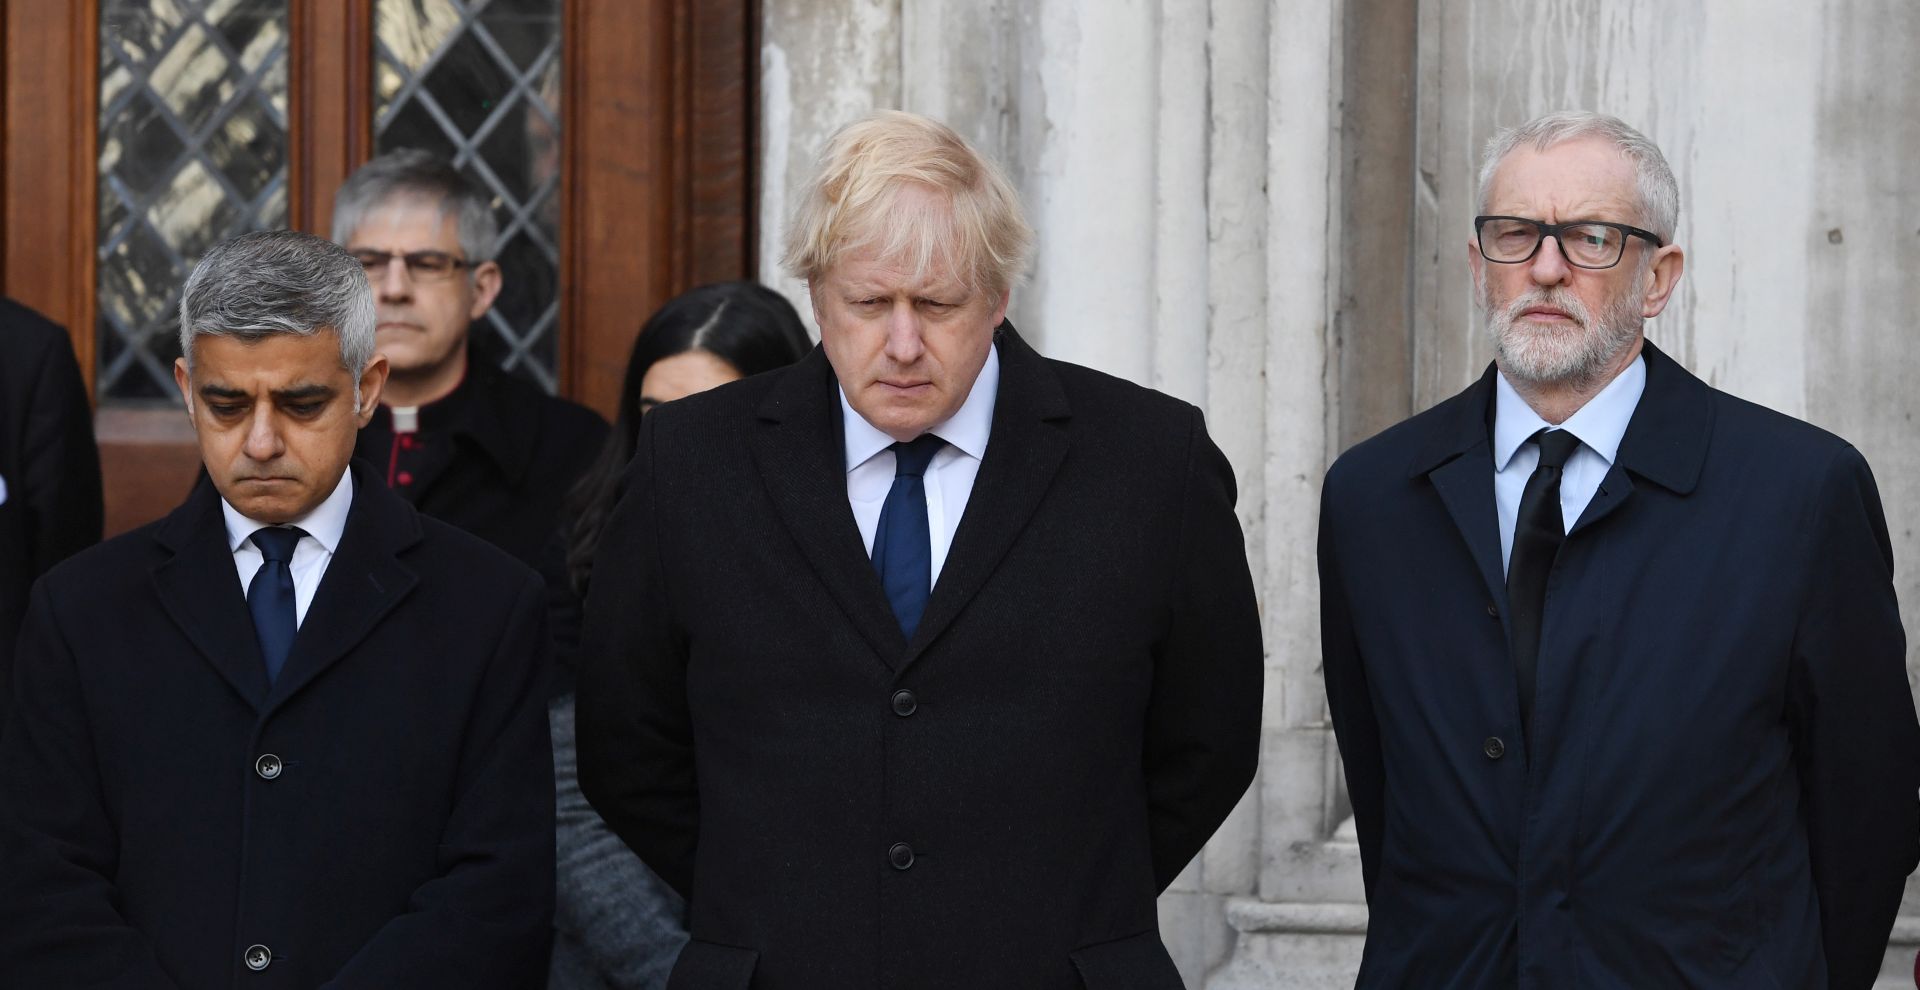 epa08039281 Mayor of London, Sadiq Khan (L), Britain's Prime Minister Boris Johnson (C) and Labour party leader Jeremy Corbyn (R) take part in a vigil at the Guildhall  to pay tribute to the victims of the London Bridge terror attack in London, Britain, 02 December 2019. Two members of the public have died and a male suspect has been shot dead by police at a scene on 29 November after a stabbing at London Bridge.  EPA/FACUNDO ARRIZABALAGA